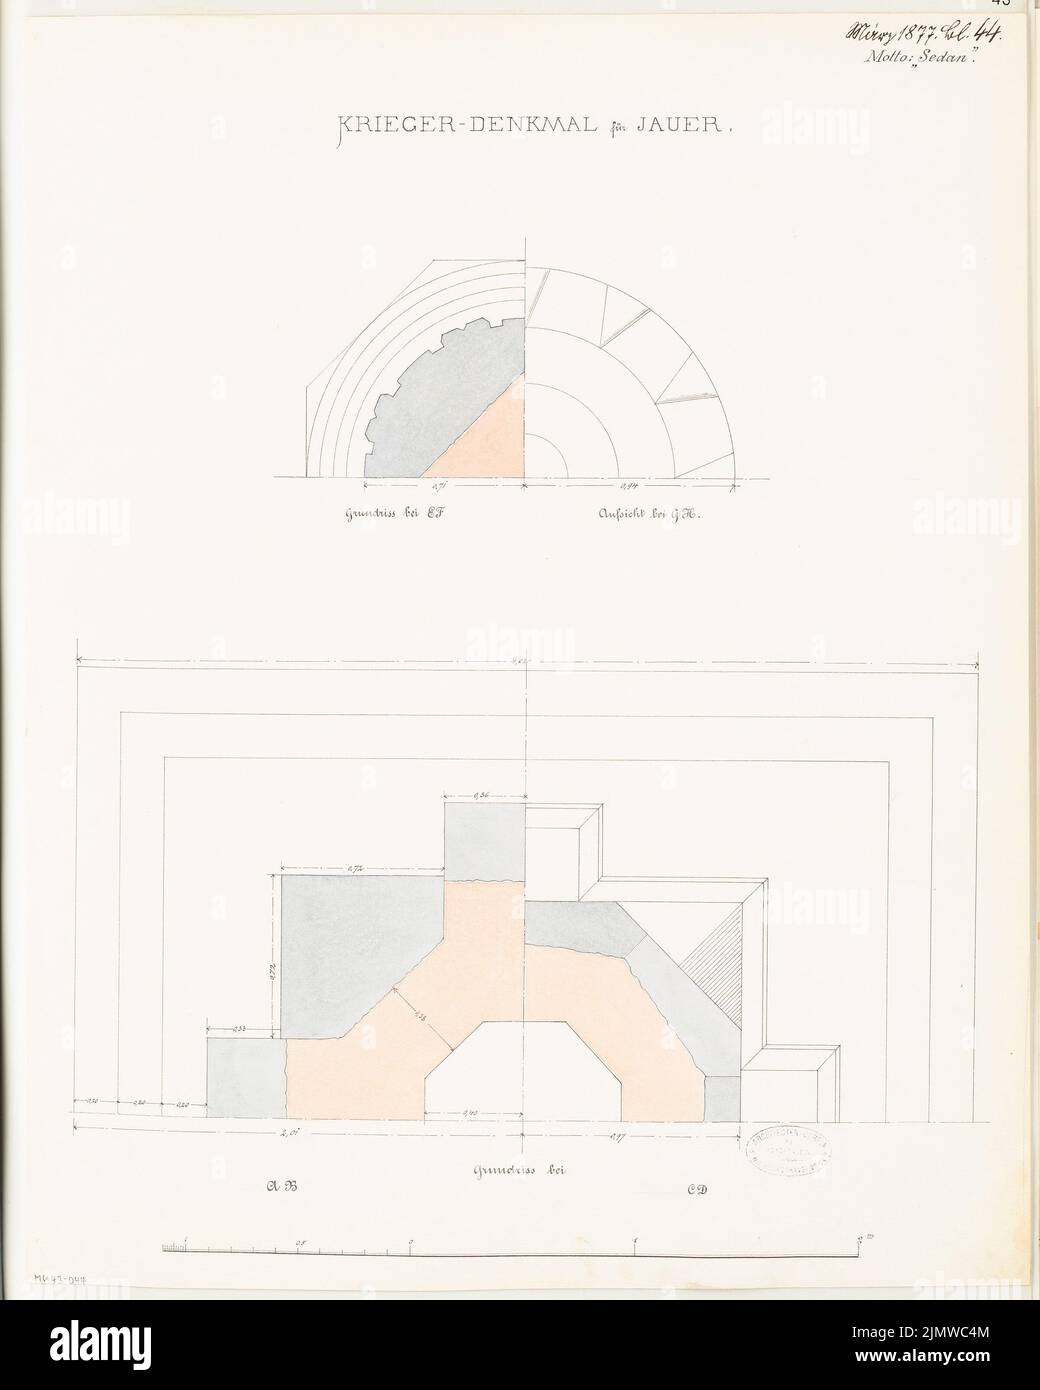 Unknown architect, a fallen monument in Jauer. Monthly competition March 1877 (03.1877): floor plans of 4 levels; Scale bar. Tusche watercolor on the box, 58 x 46.4 cm (including scan edges) N.N. : Gefallenendenkmal, Jauer. Monatskonkurrenz März 1877 Stock Photo